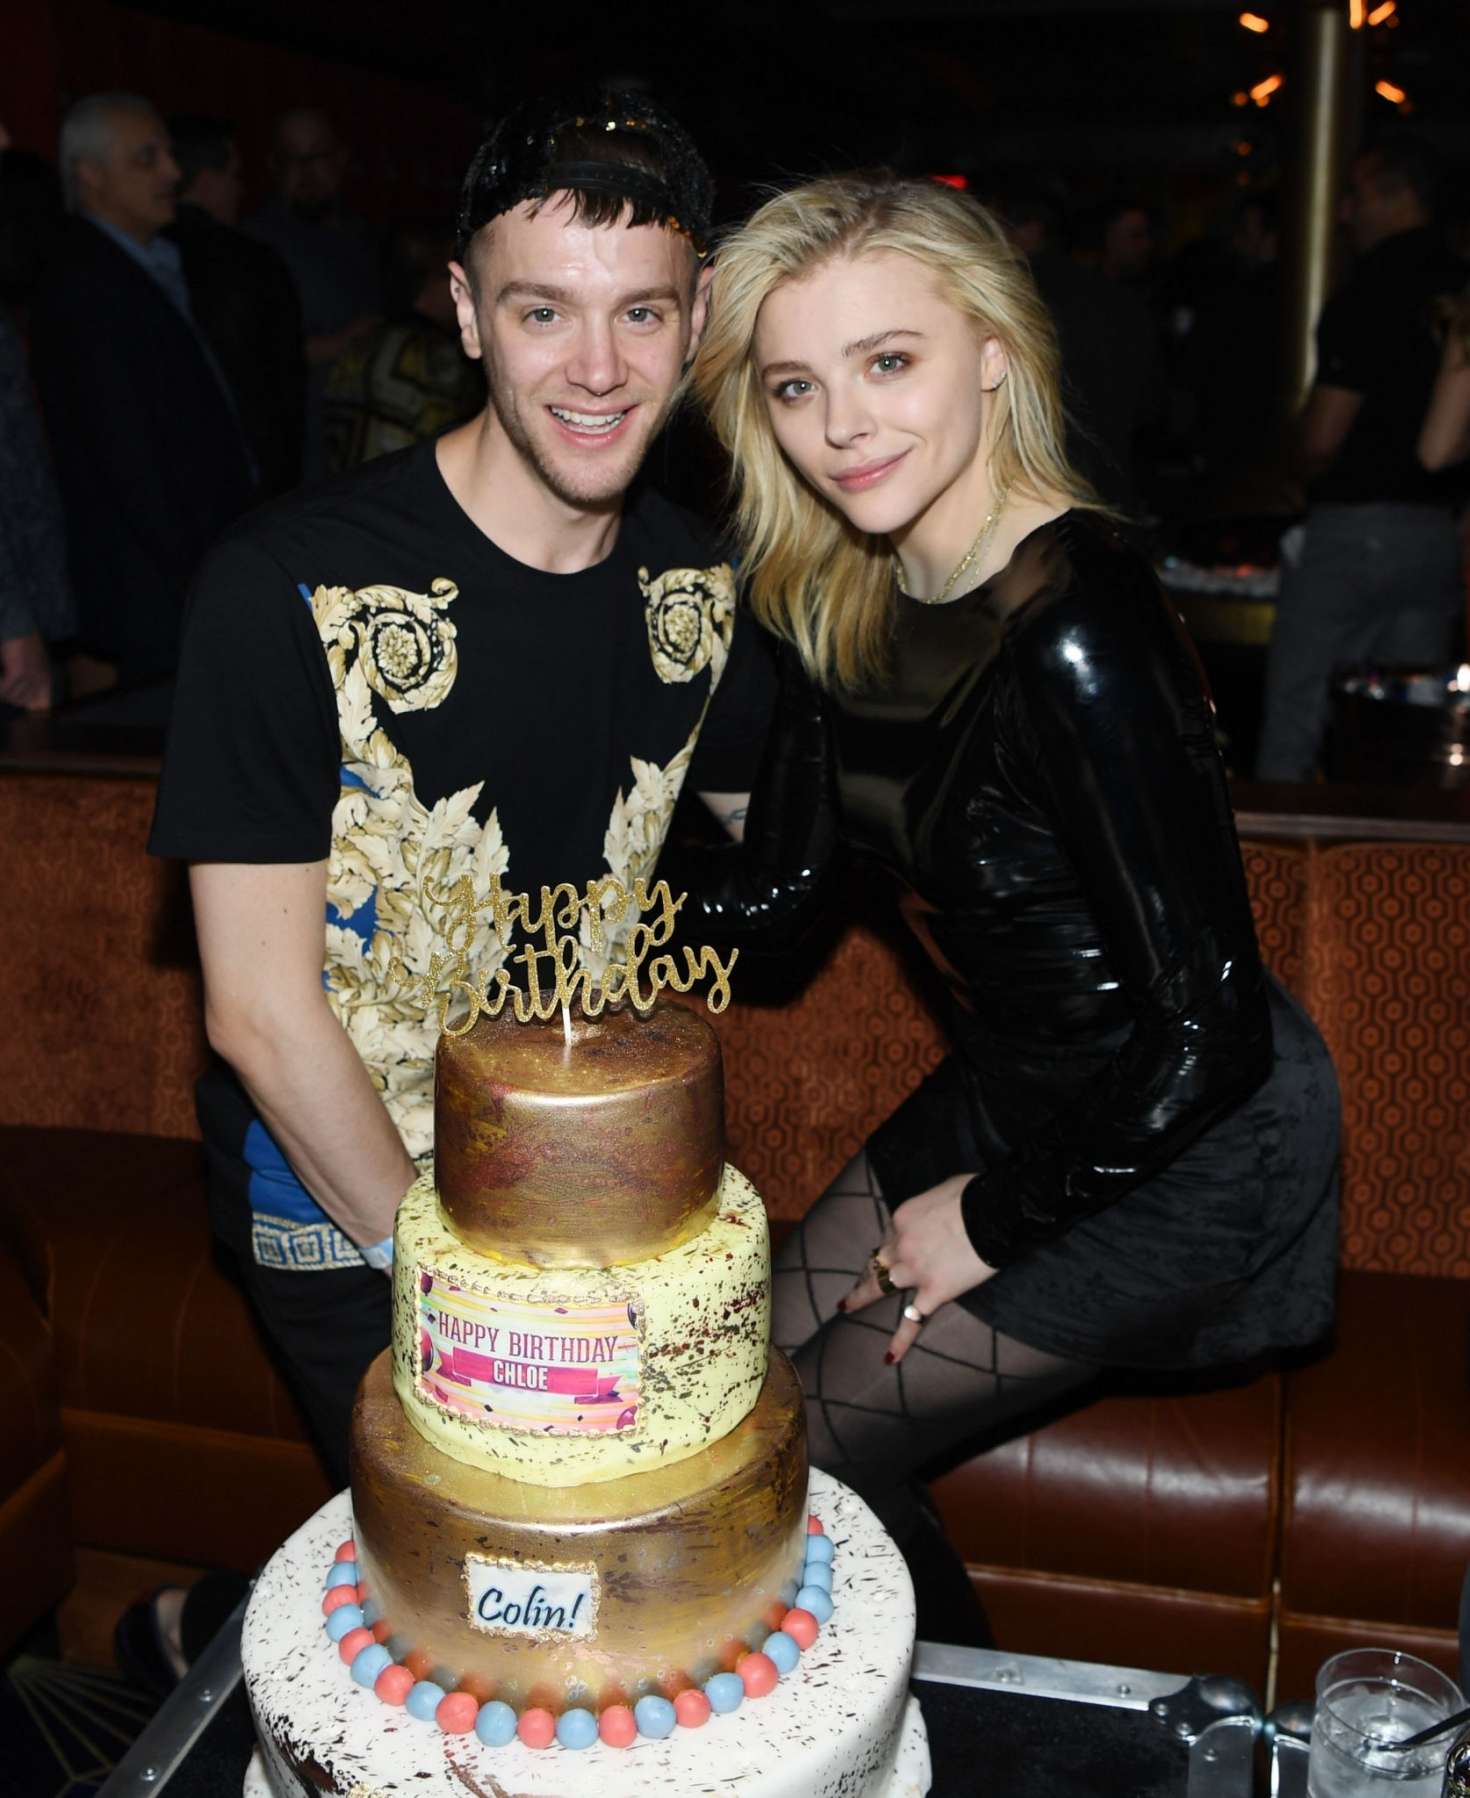 Chloe Moretz and her brother Colin Moretz - Celebrate their birthday in Las Vegas